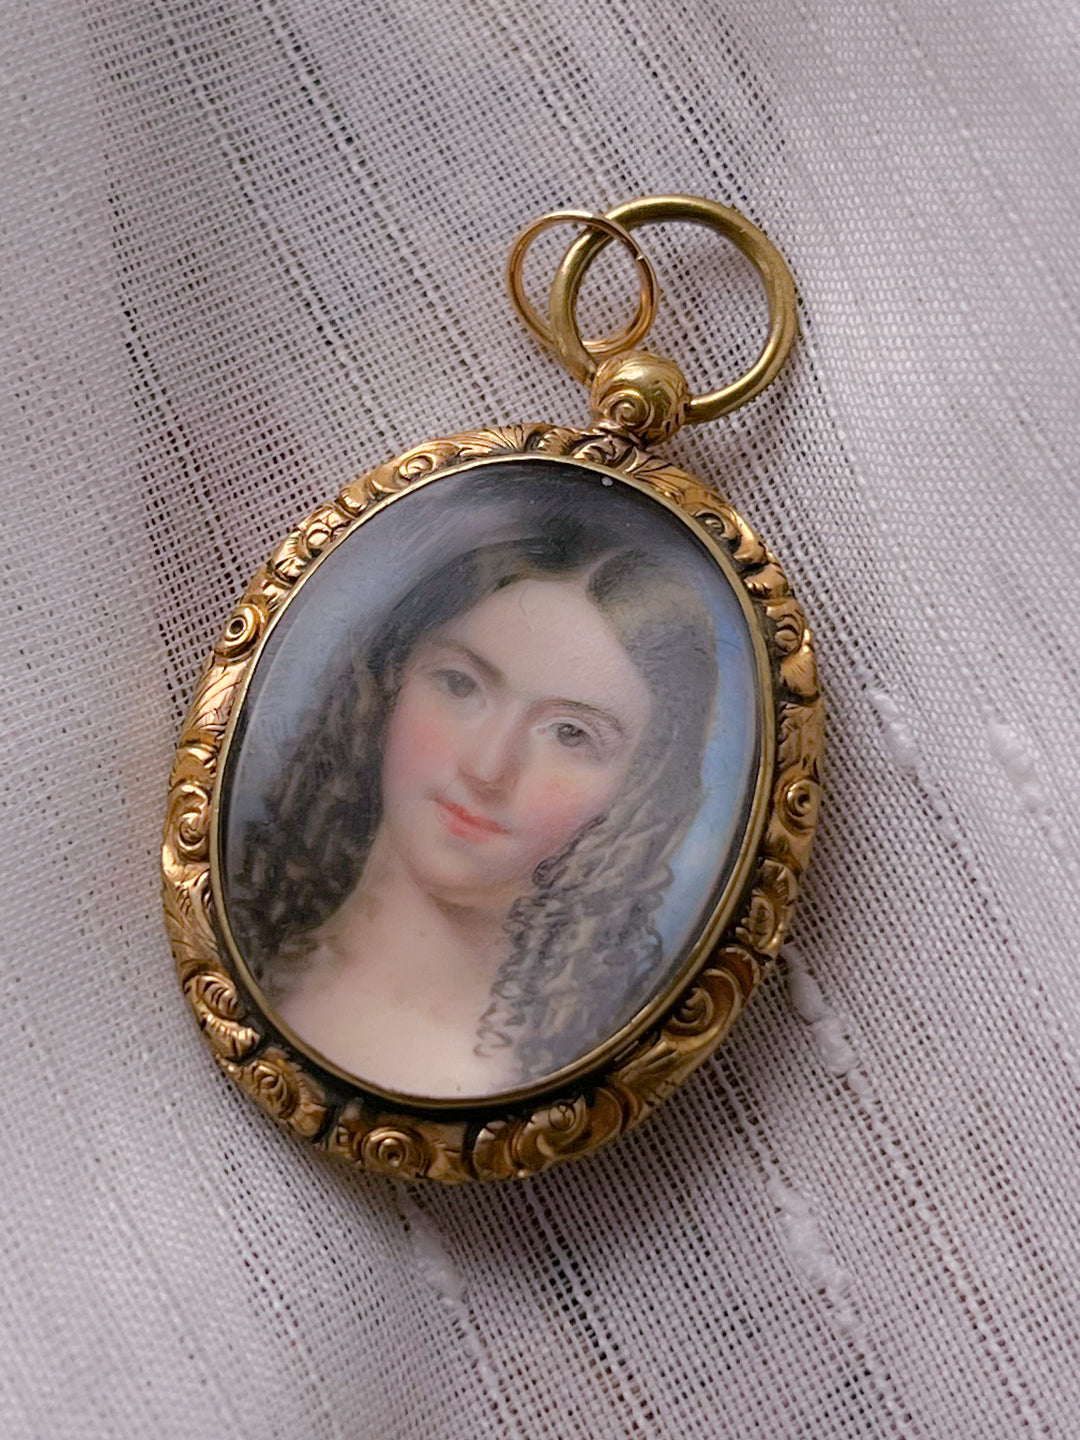 Early American Portrait of a Young Girl with Curls in 10ct Gold